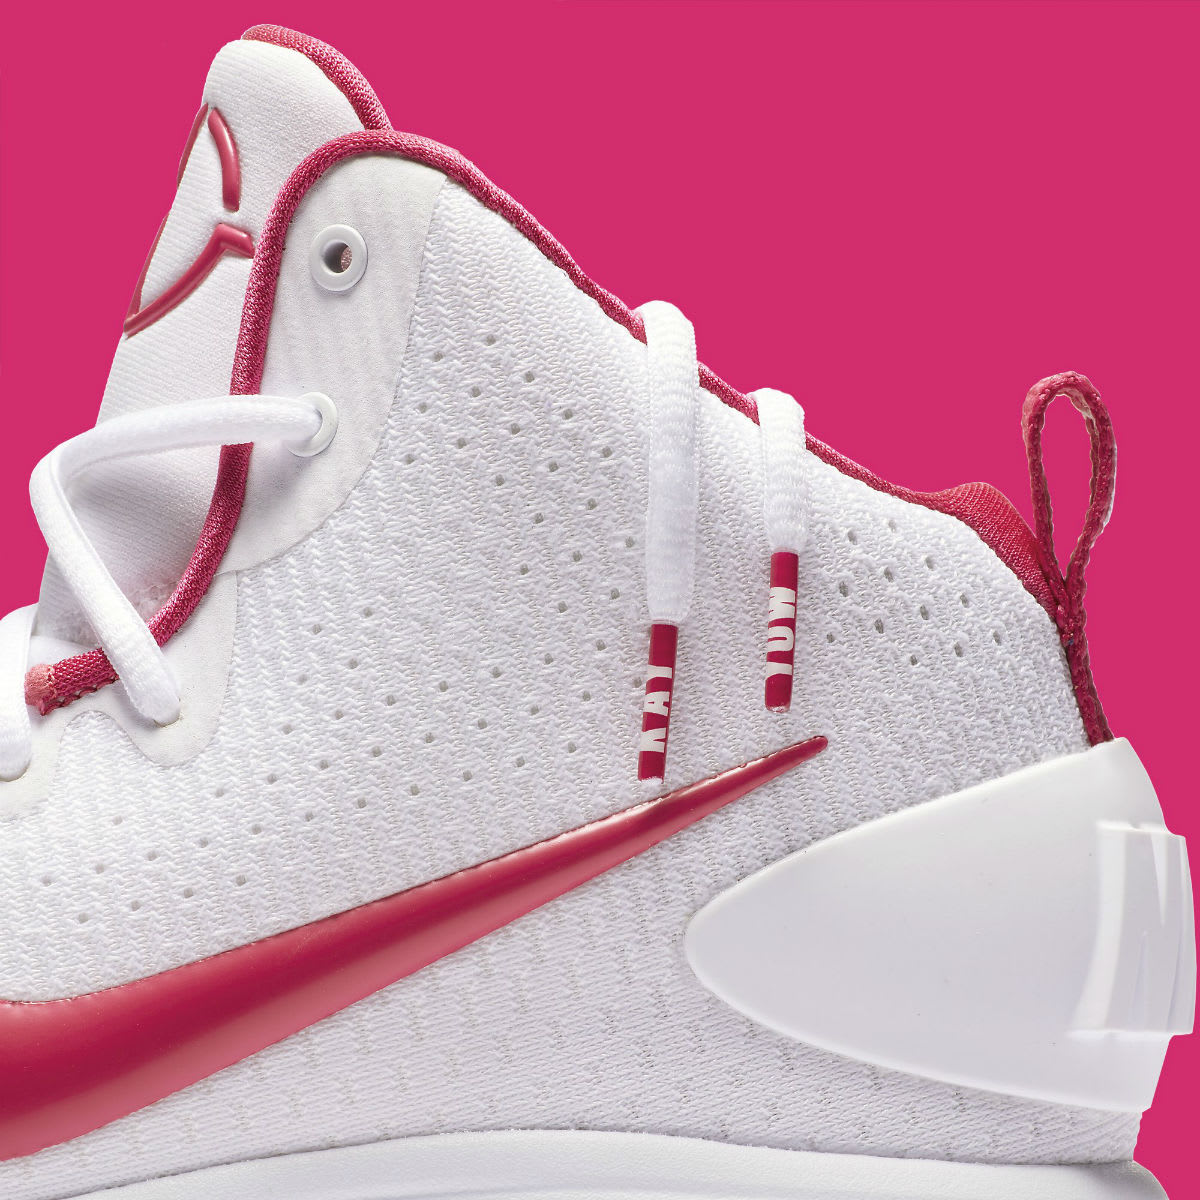 Nike Hyperdunk 2017 Kay Yow Think Pink Release Date Laces 897631-100